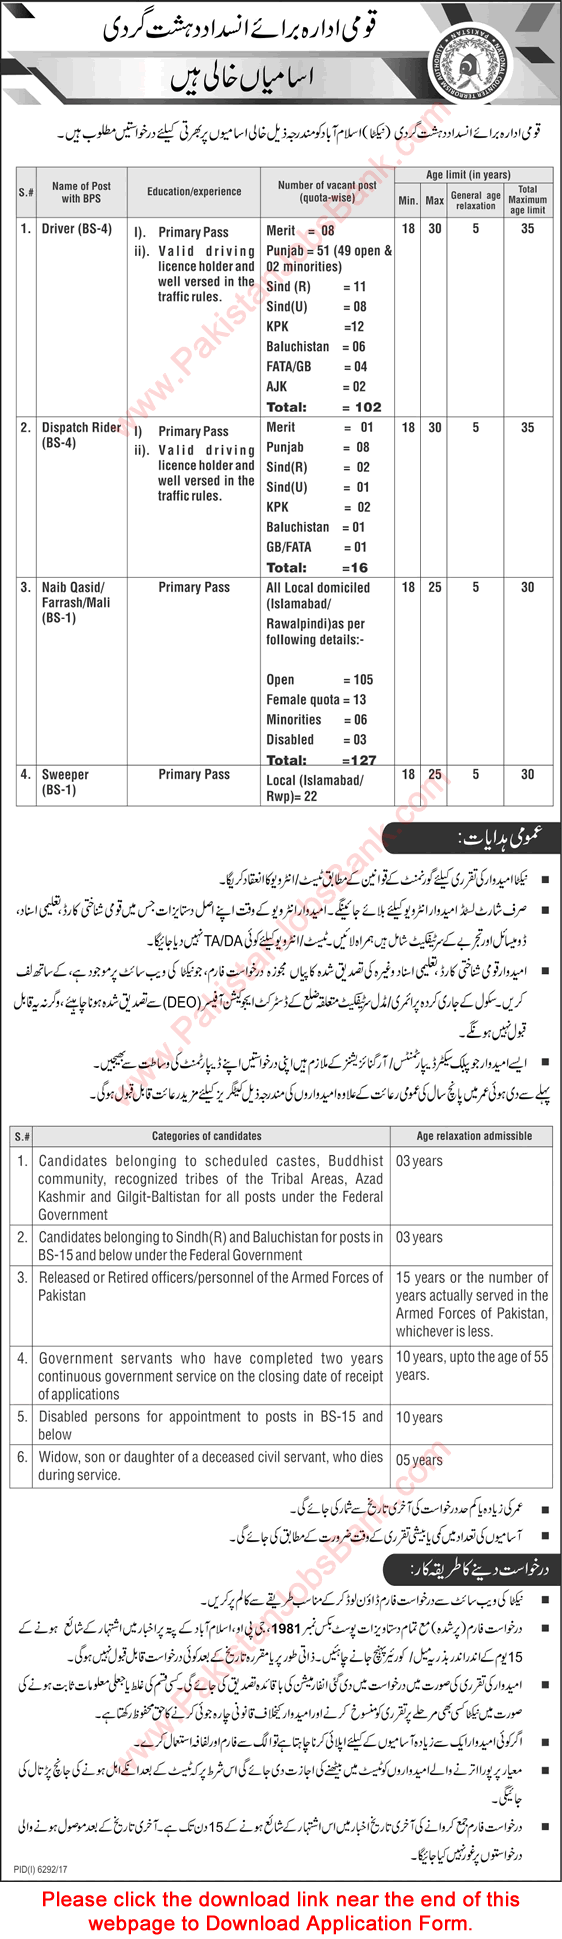 National Counter Terrorism Authority Islamabad Jobs 2018 May Application Form Drivers, Naib Qasid & Others Latest